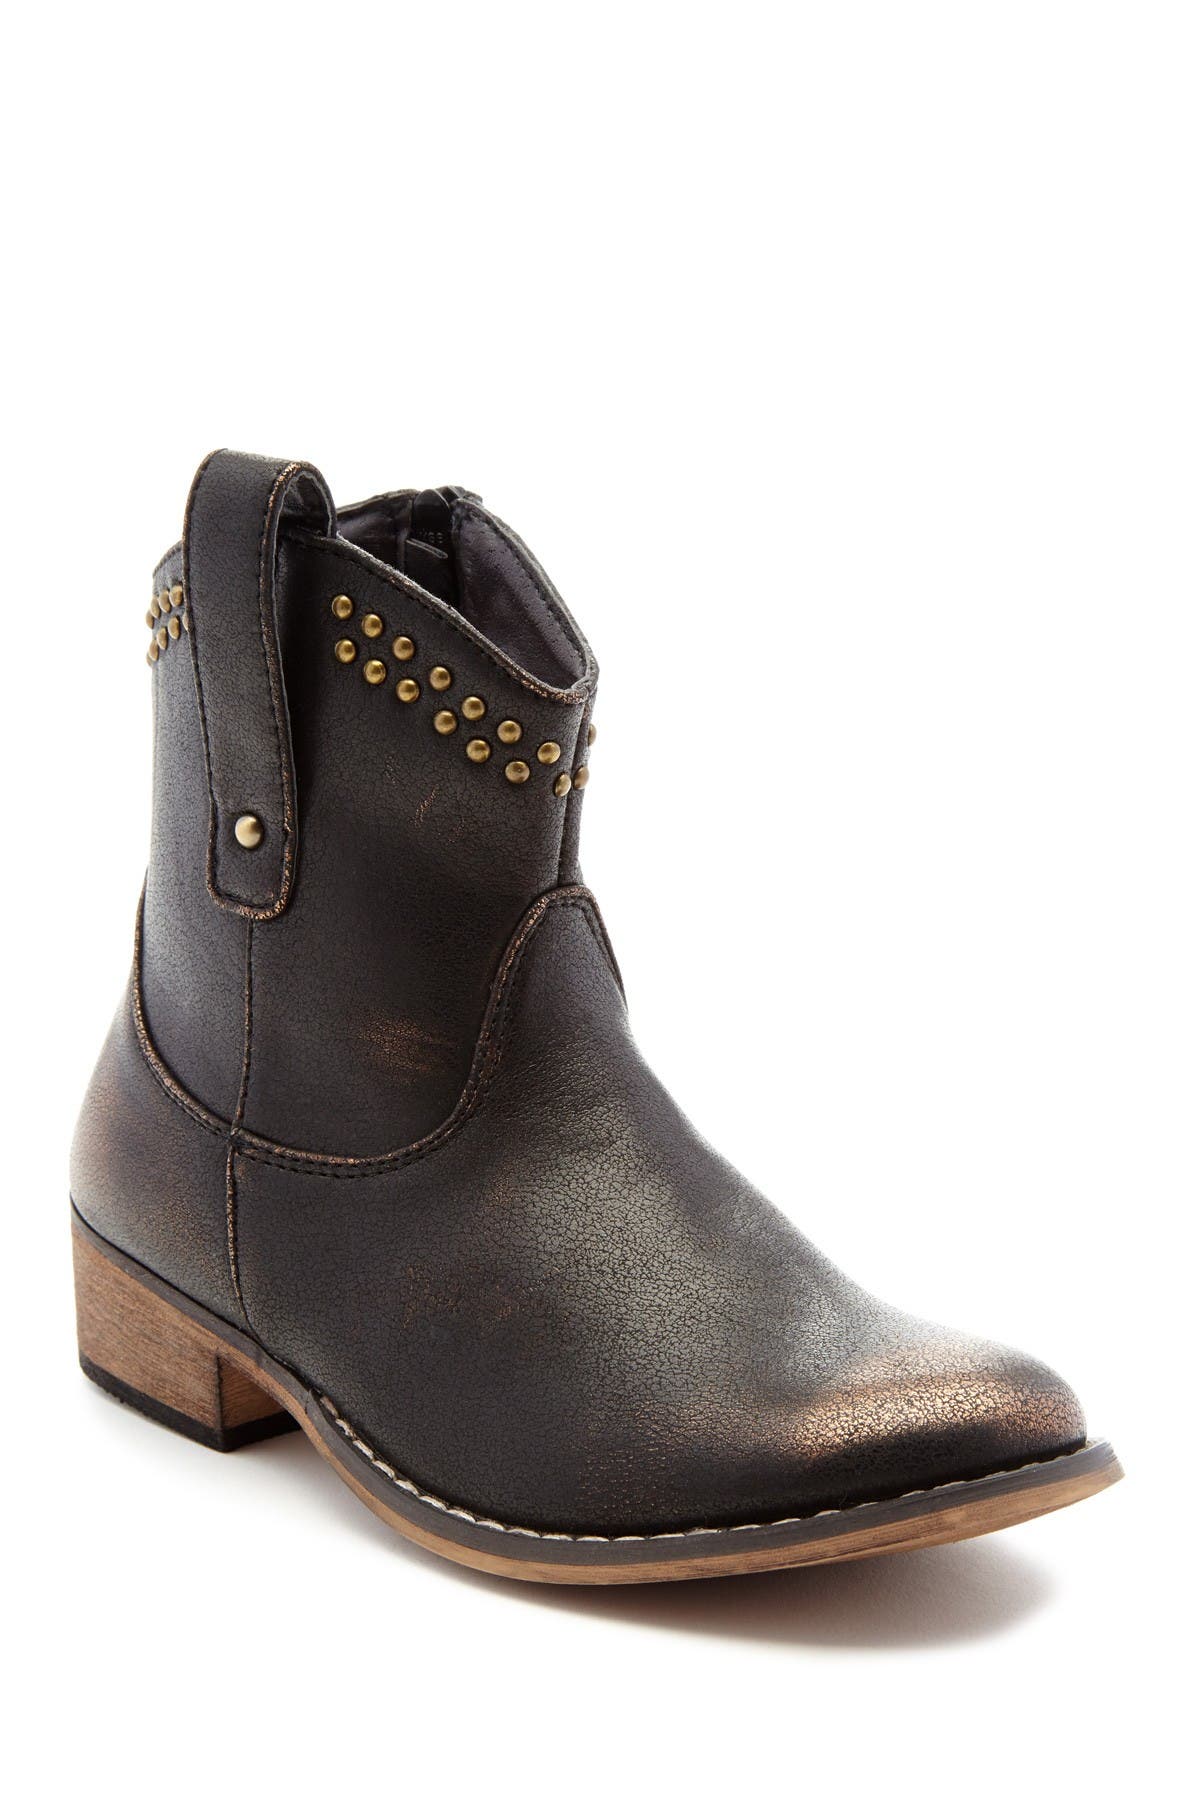 Josmo | Kensie Studded Cowgirl Boot 